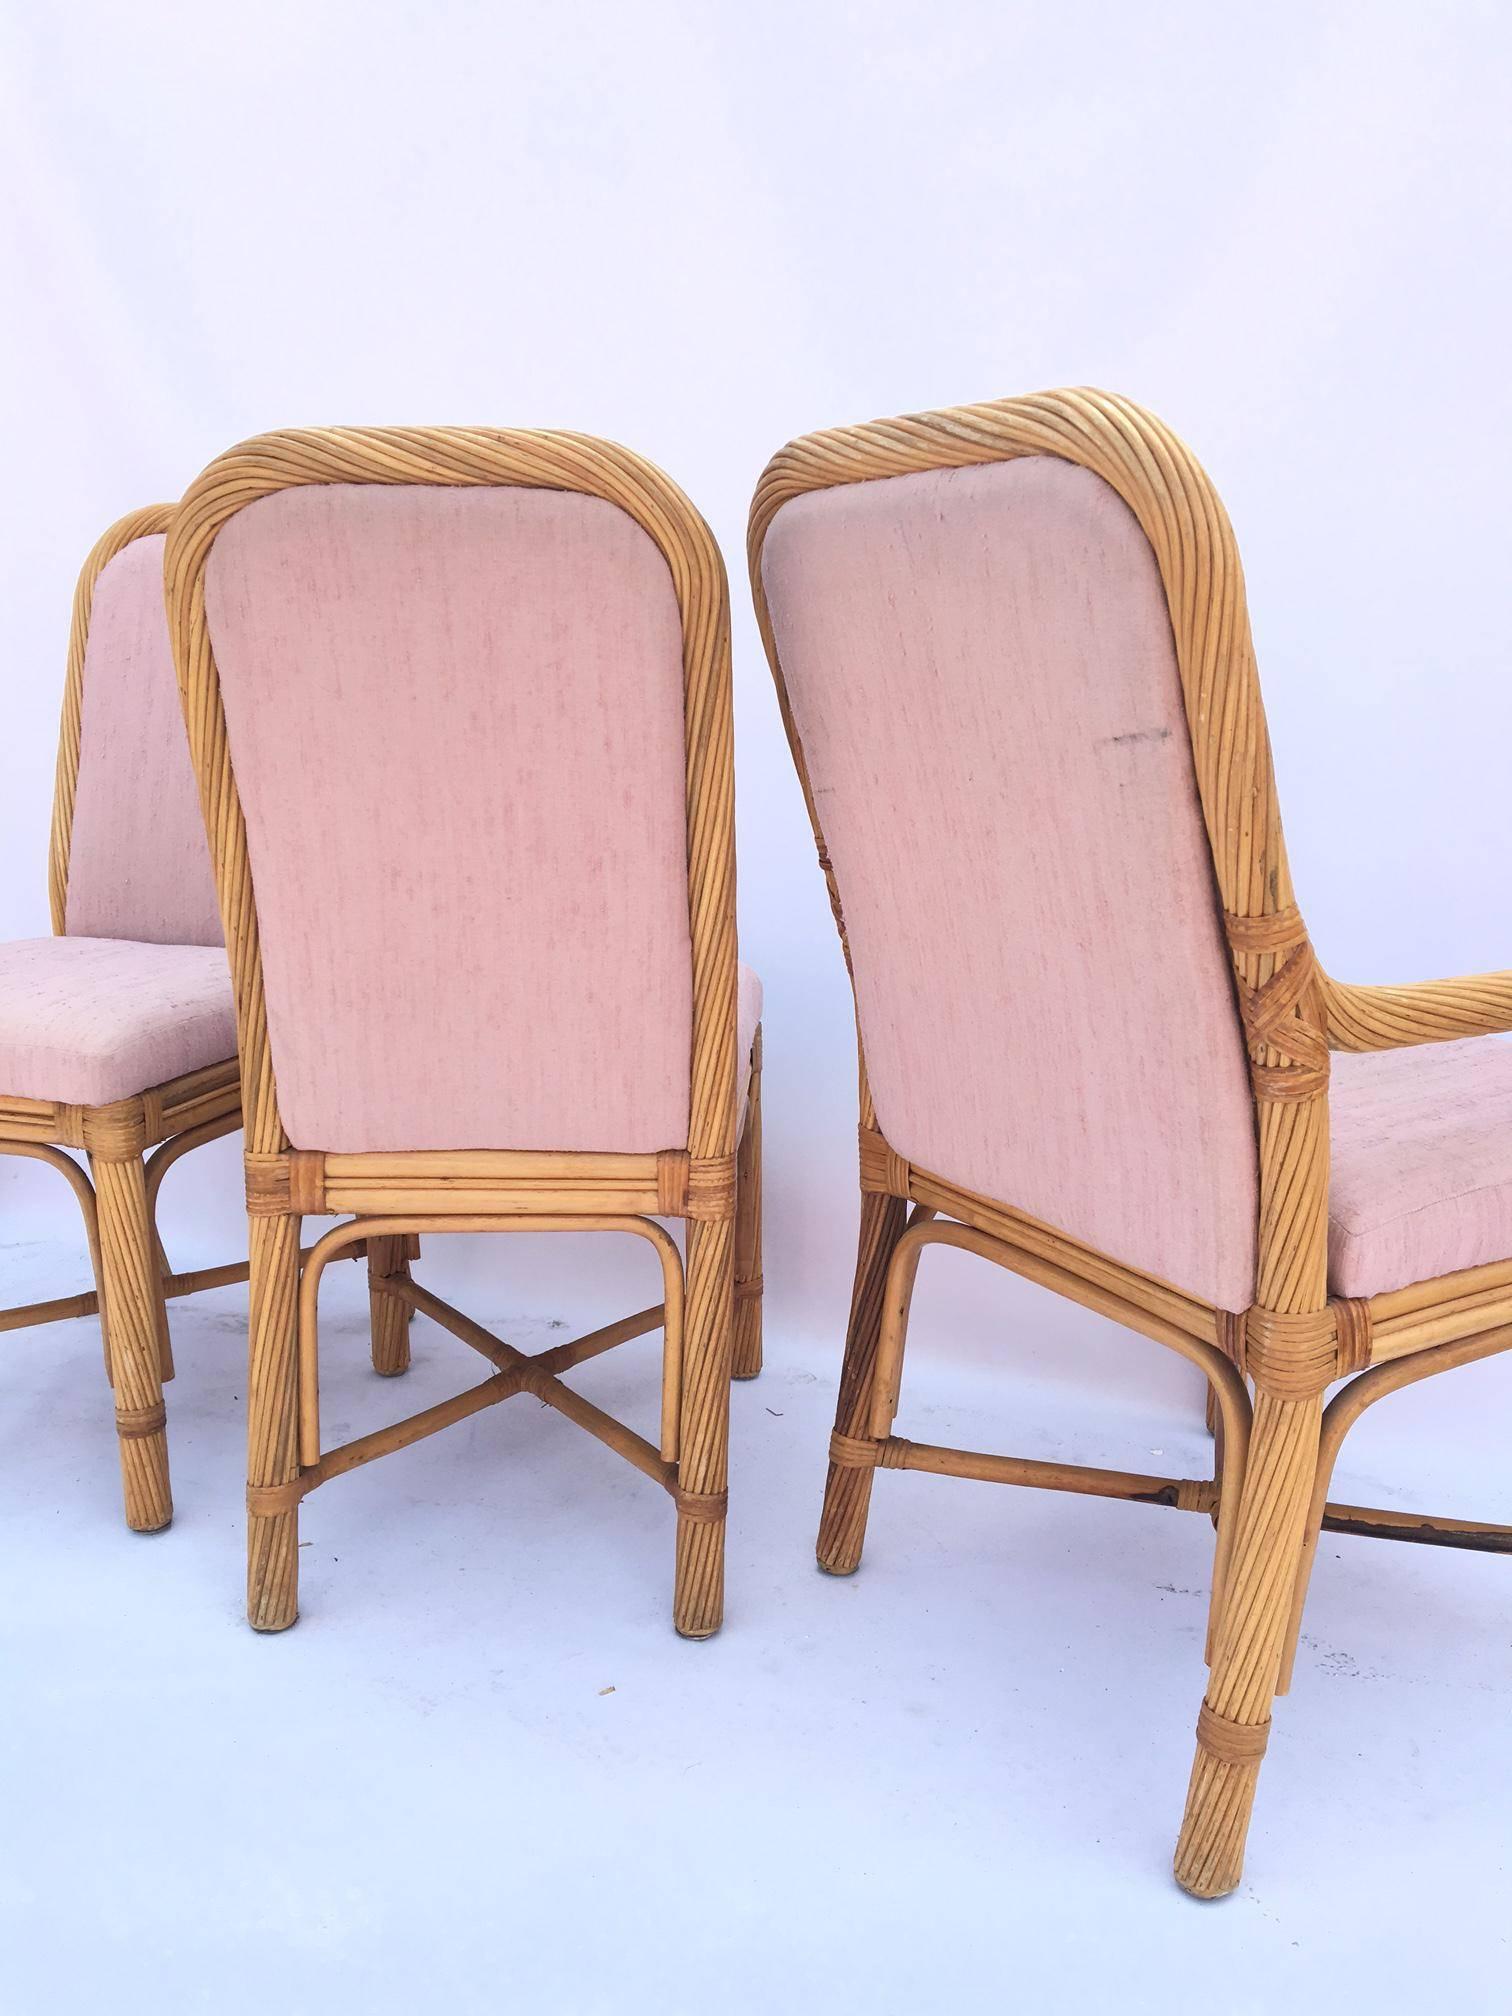 pencil reed chairs